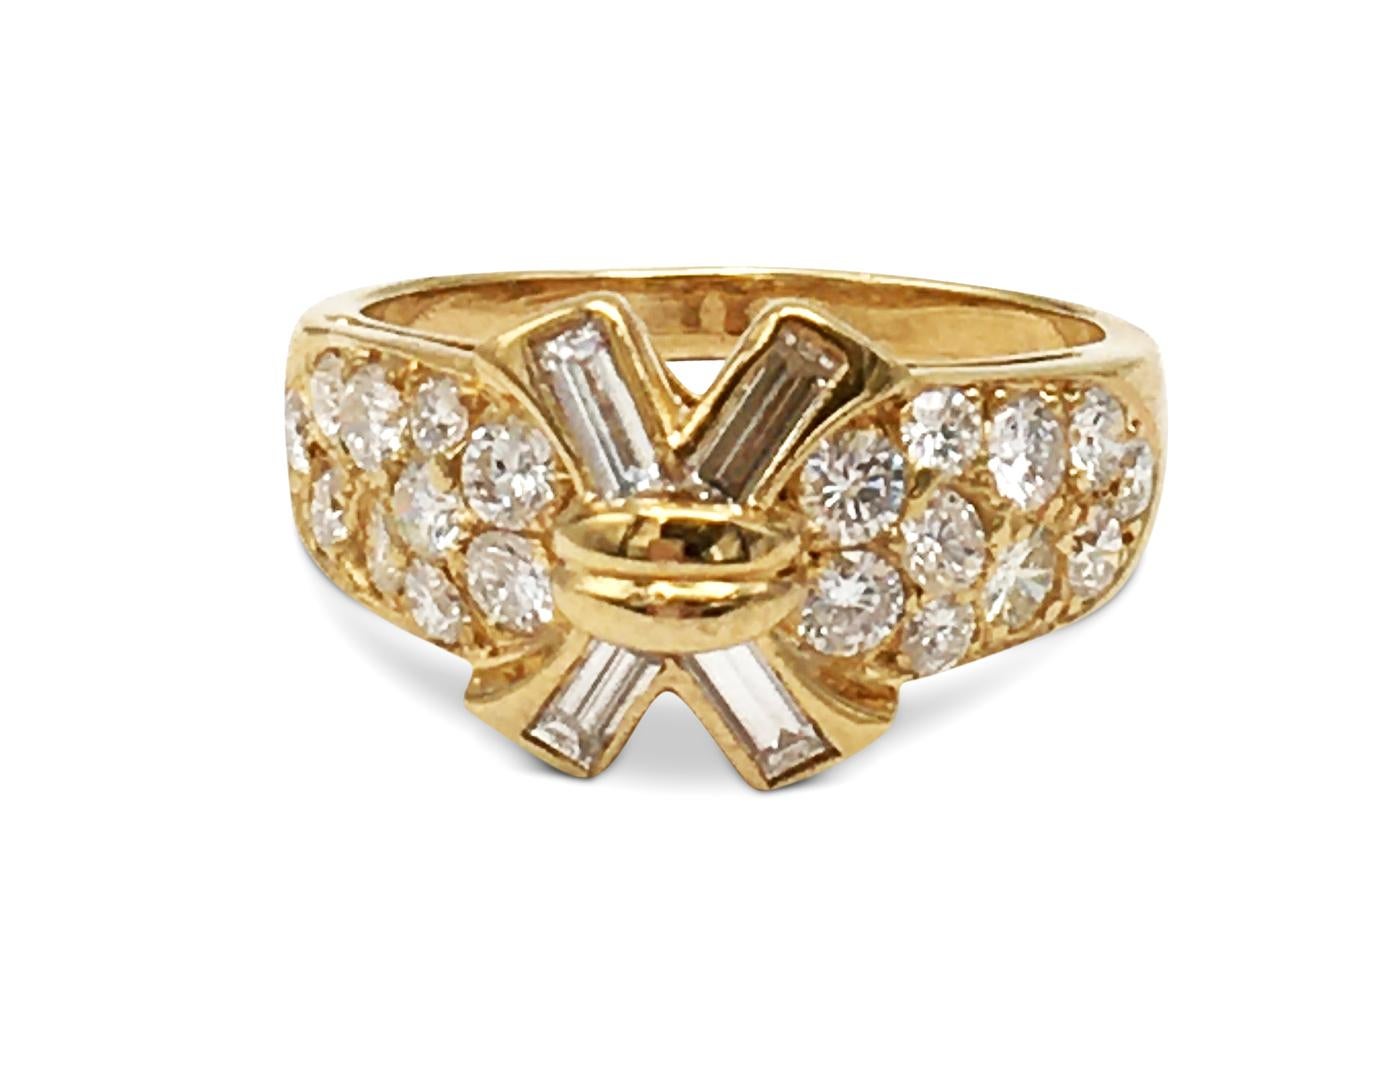 Authentic Mauboussin ring made in 18 karat yellow gold featuring 20 round cut diamonds weighing approximately .07ct each and 4 emerald cut diamonds weighing approximately .16ct each. Size 8.  Mauboussin stamp is faint and partially rubbed, but